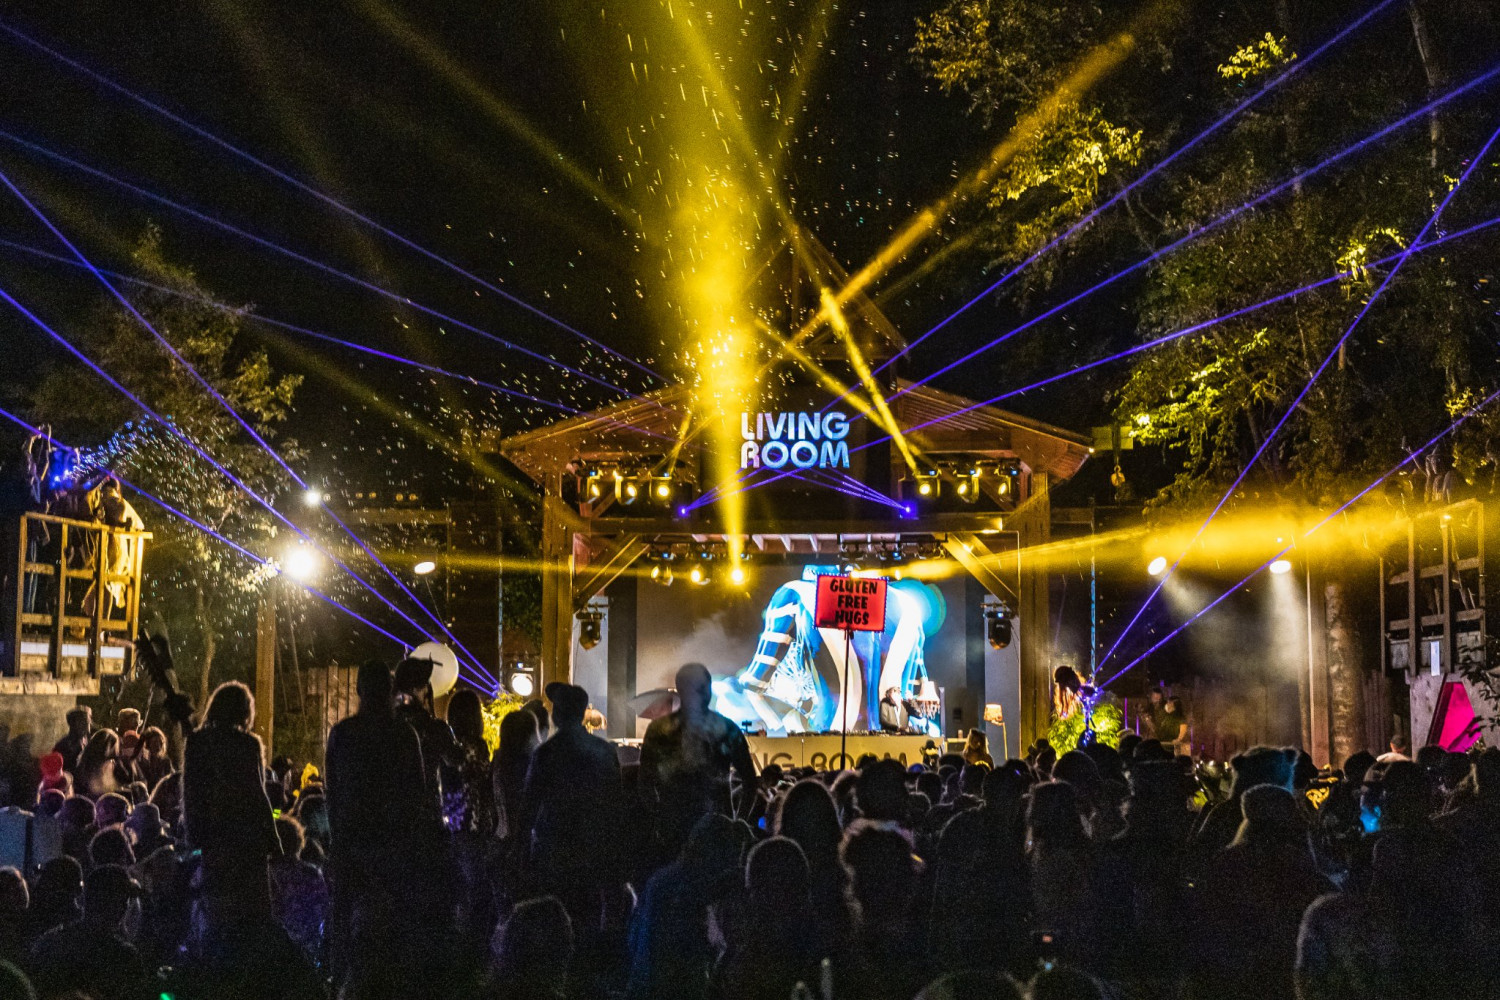 Shambhala Music Festival Returns For Its 23rd Edition Featuring Chris Lake, Subtronics, Cordae, And More